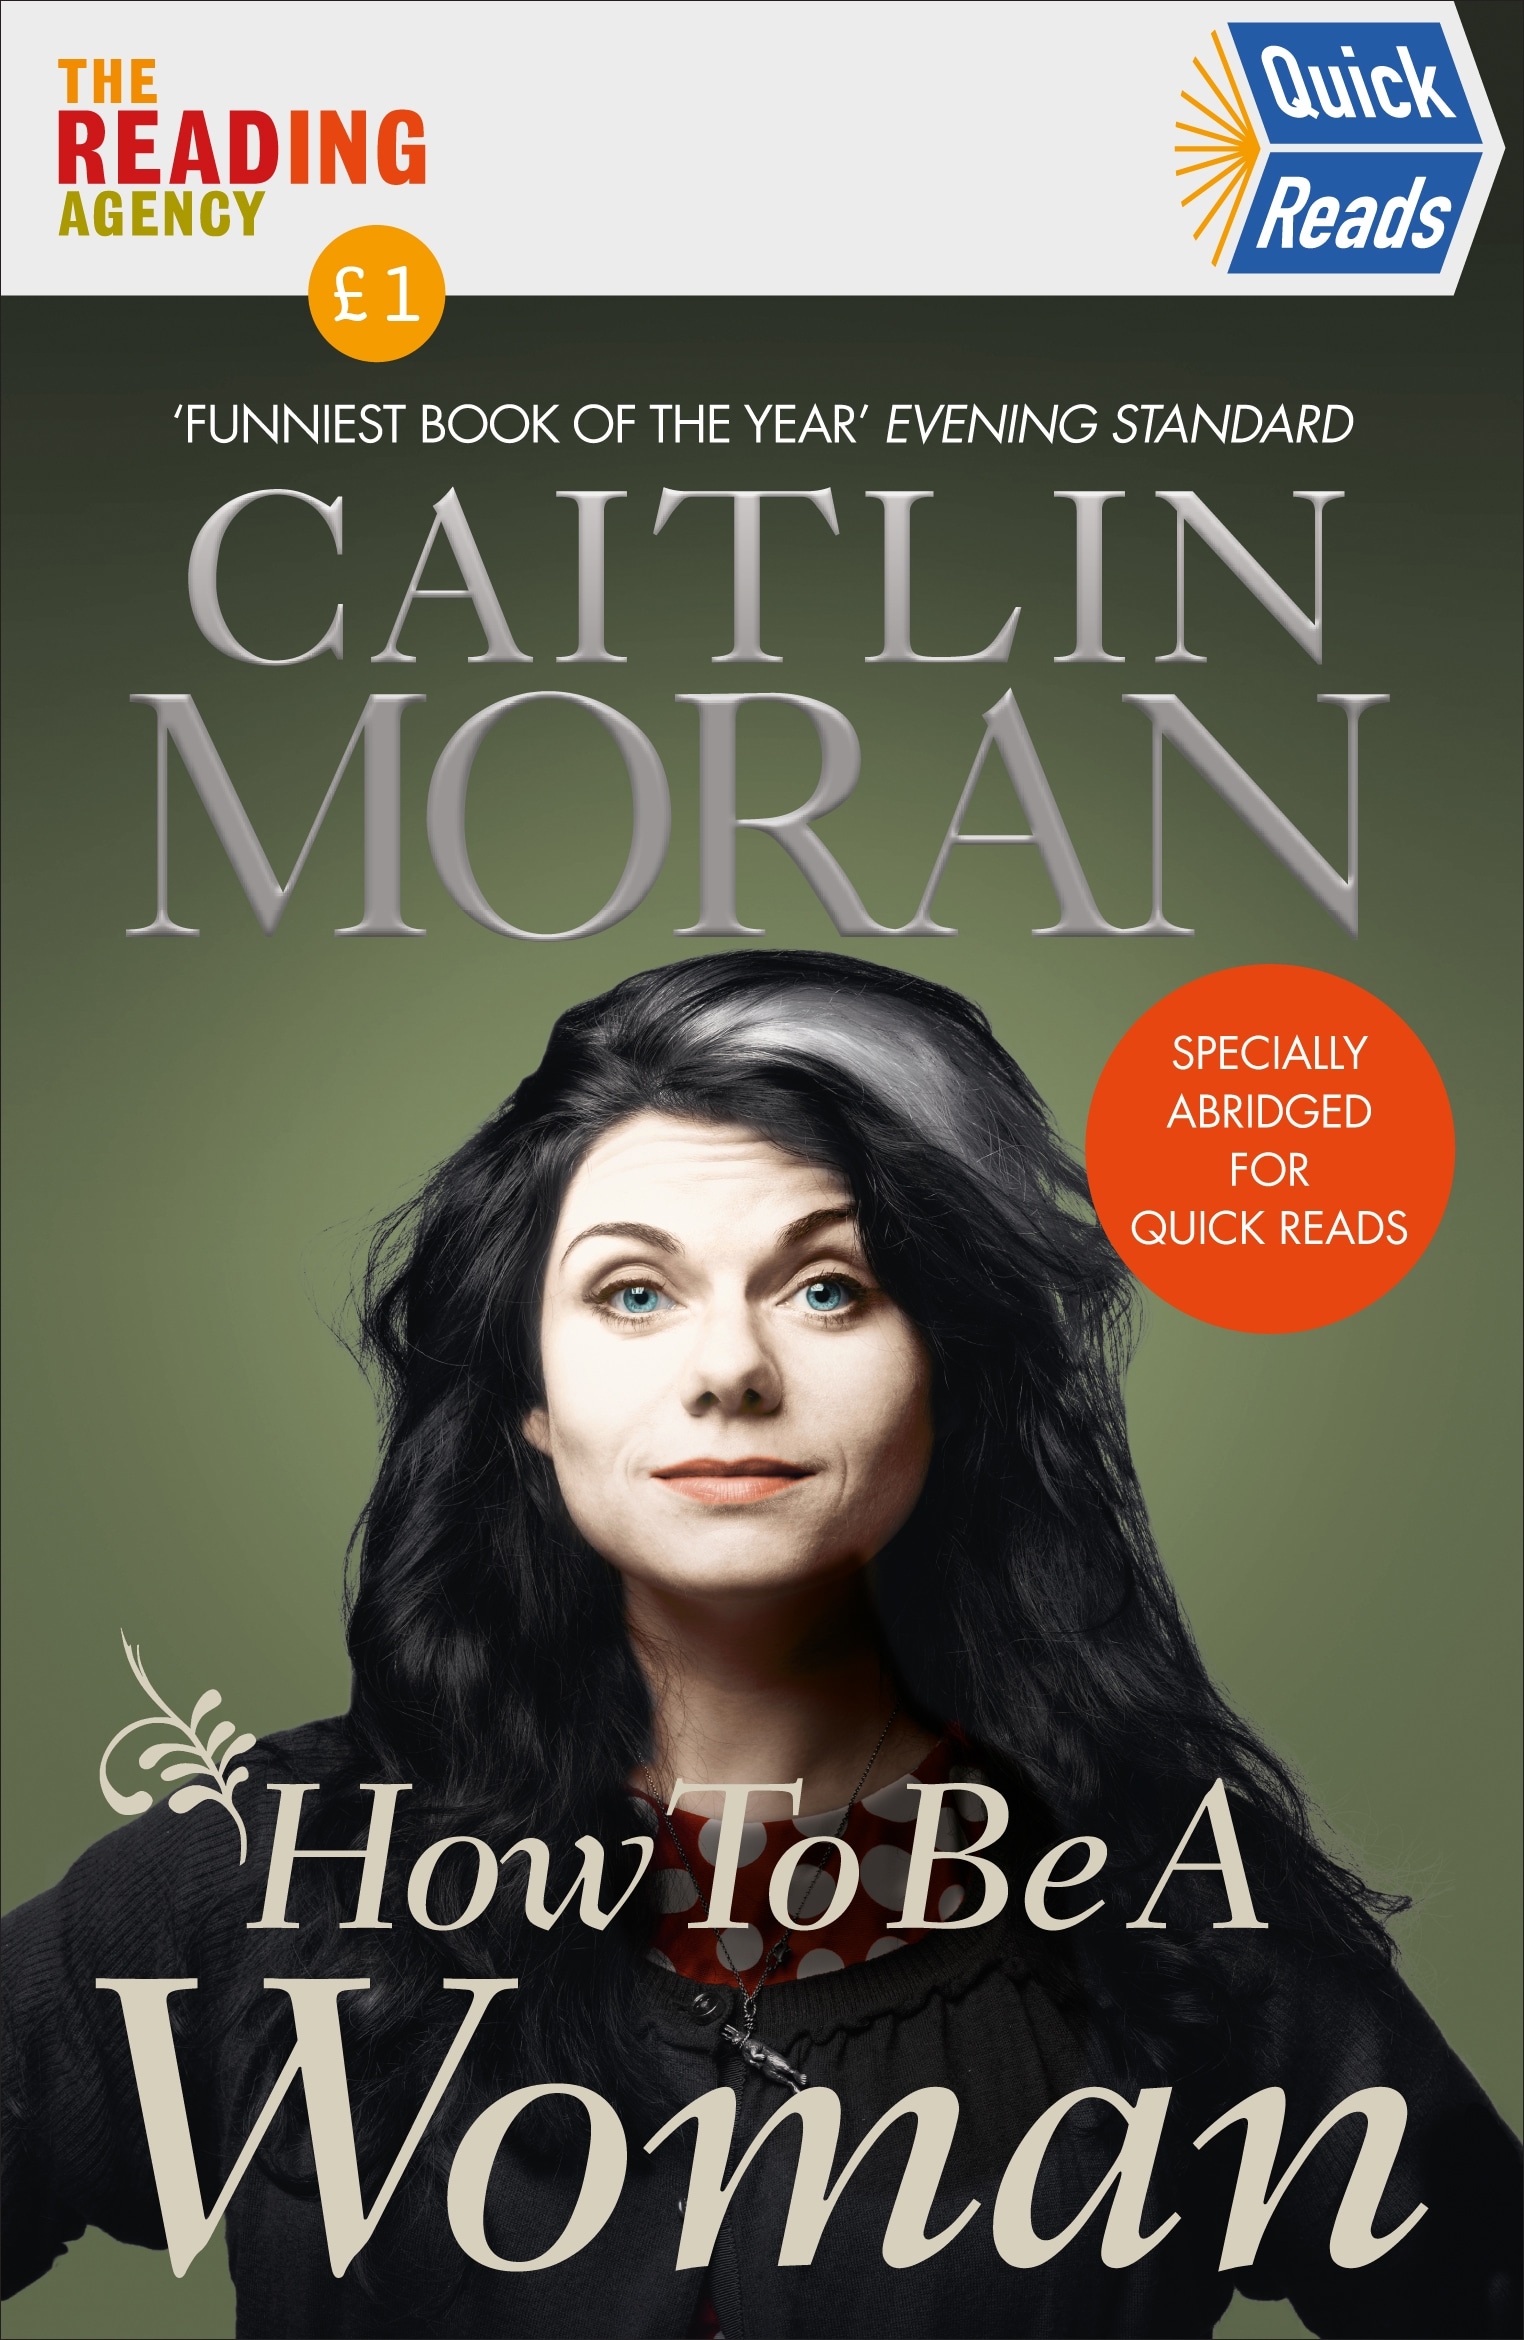 Book “How To Be a Woman Quick Reads 2021” by Caitlin Moran — May 27, 2021